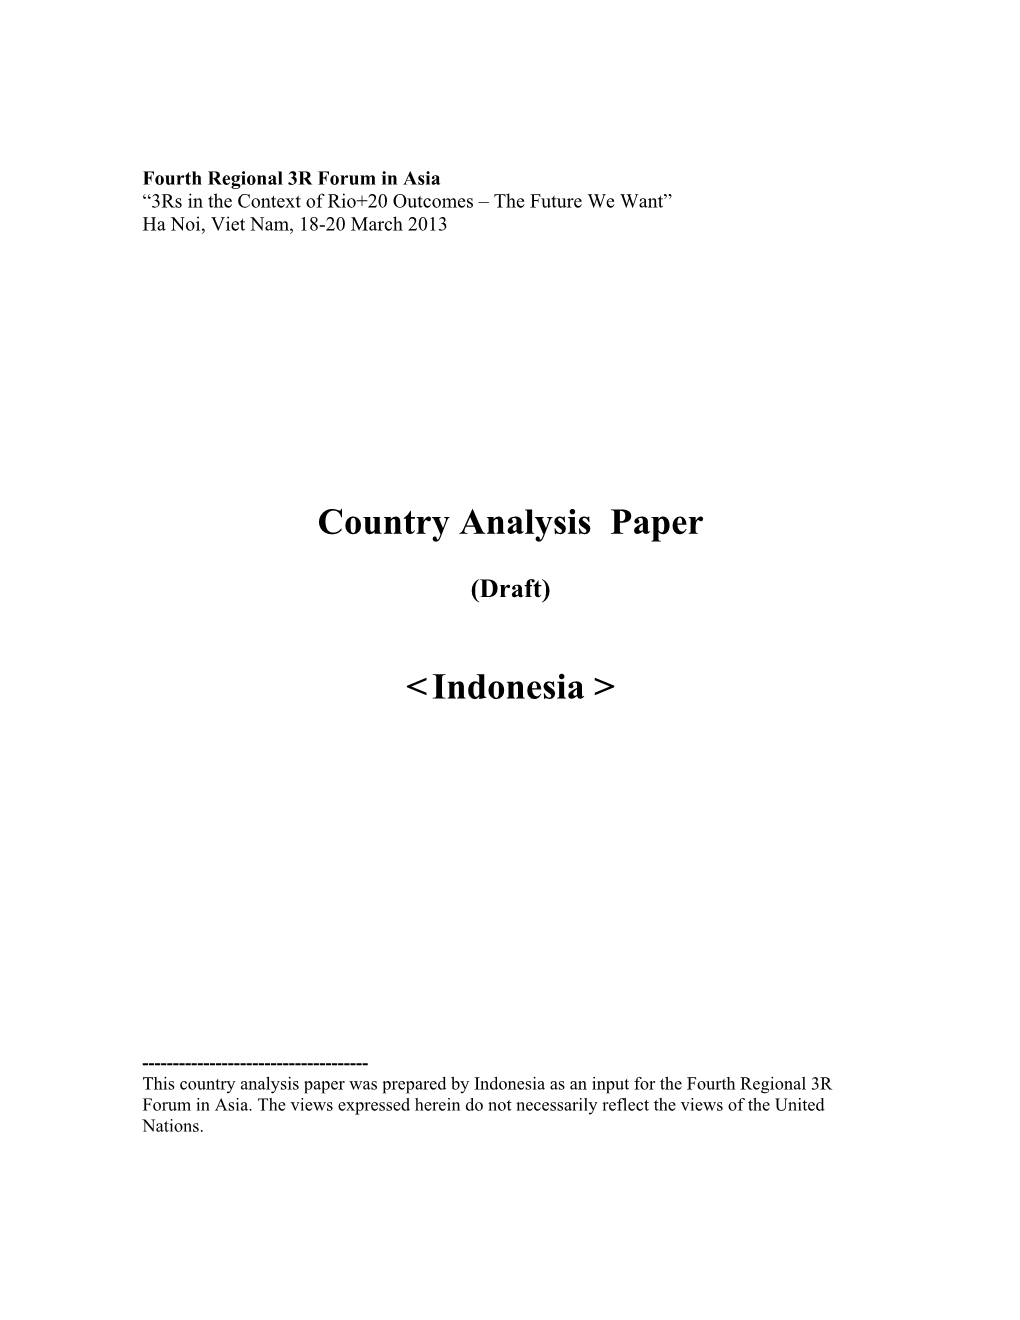 Country Analysis Paper &lt;Indonesia &gt;